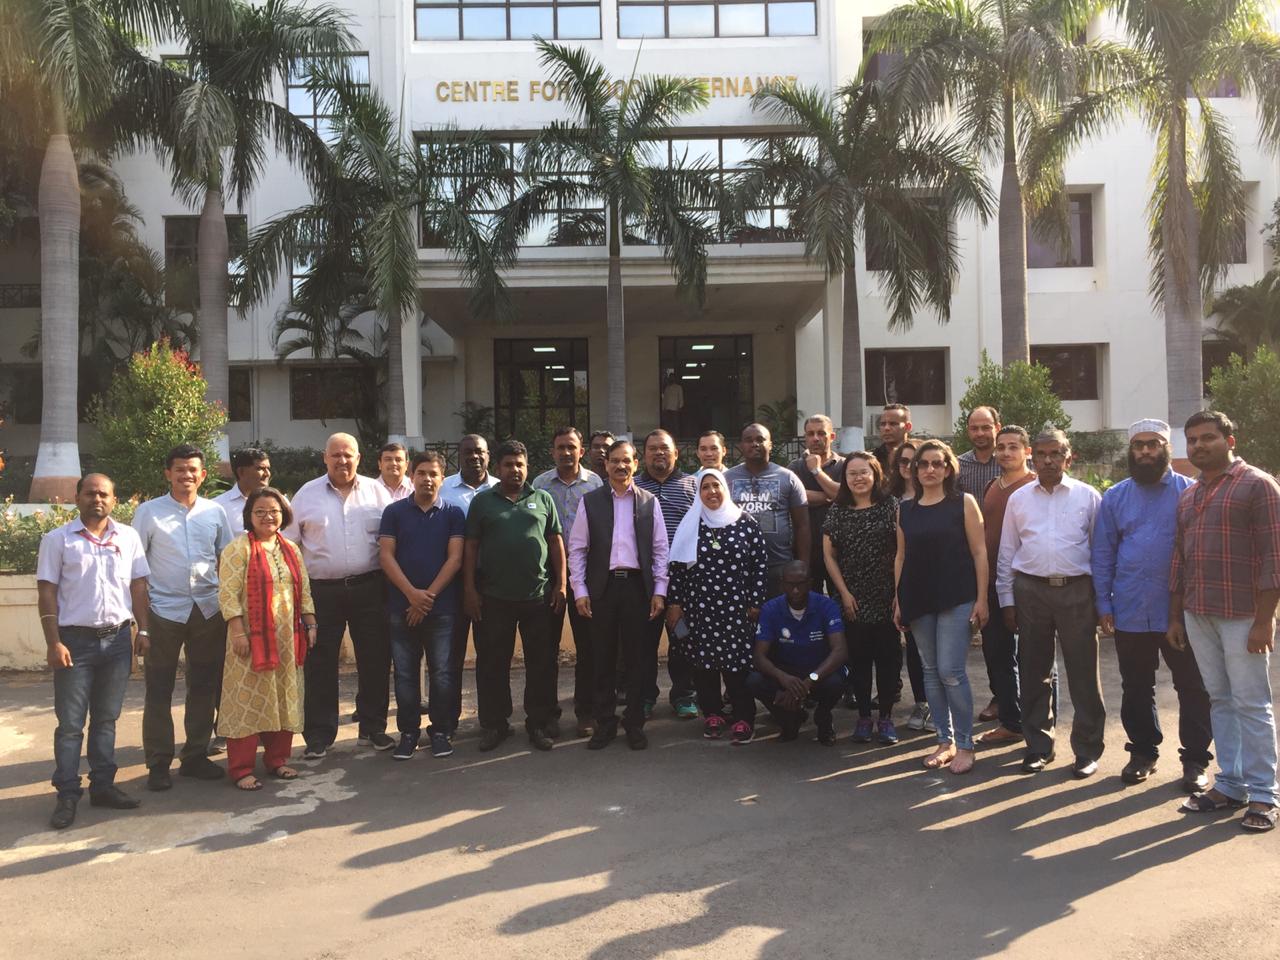 delegation from Africa & South East Asian countries visited CGG on 7 February 2019